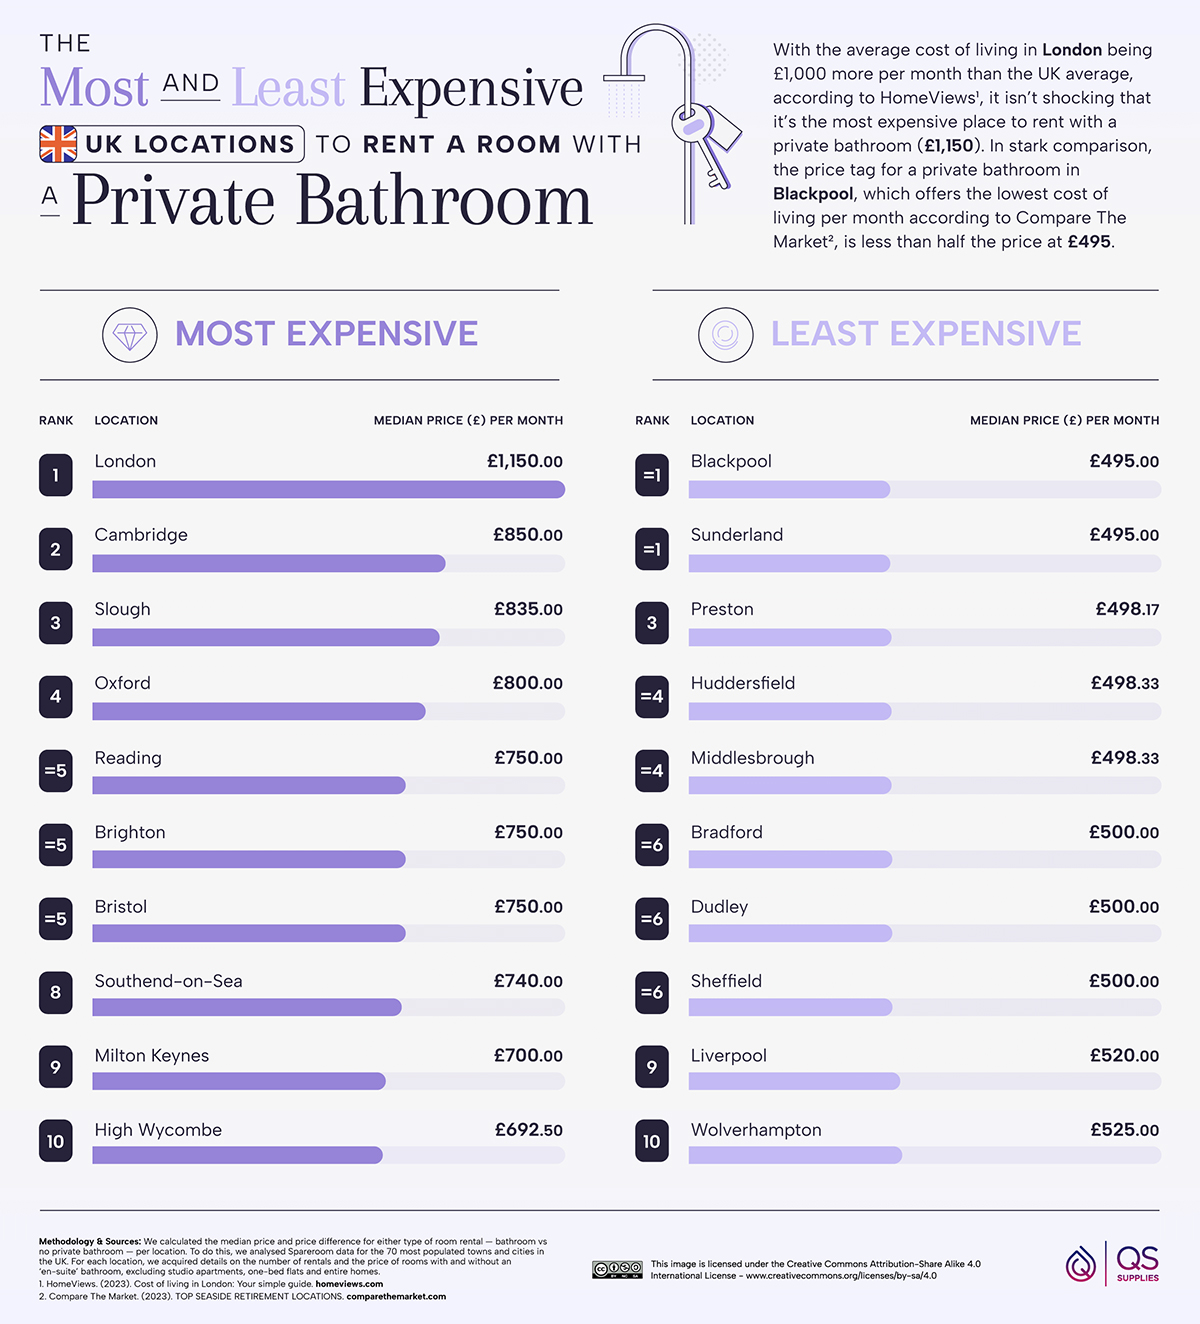 Most and Least Expensive UK Locations To Rent A Room With A Private Bathroom